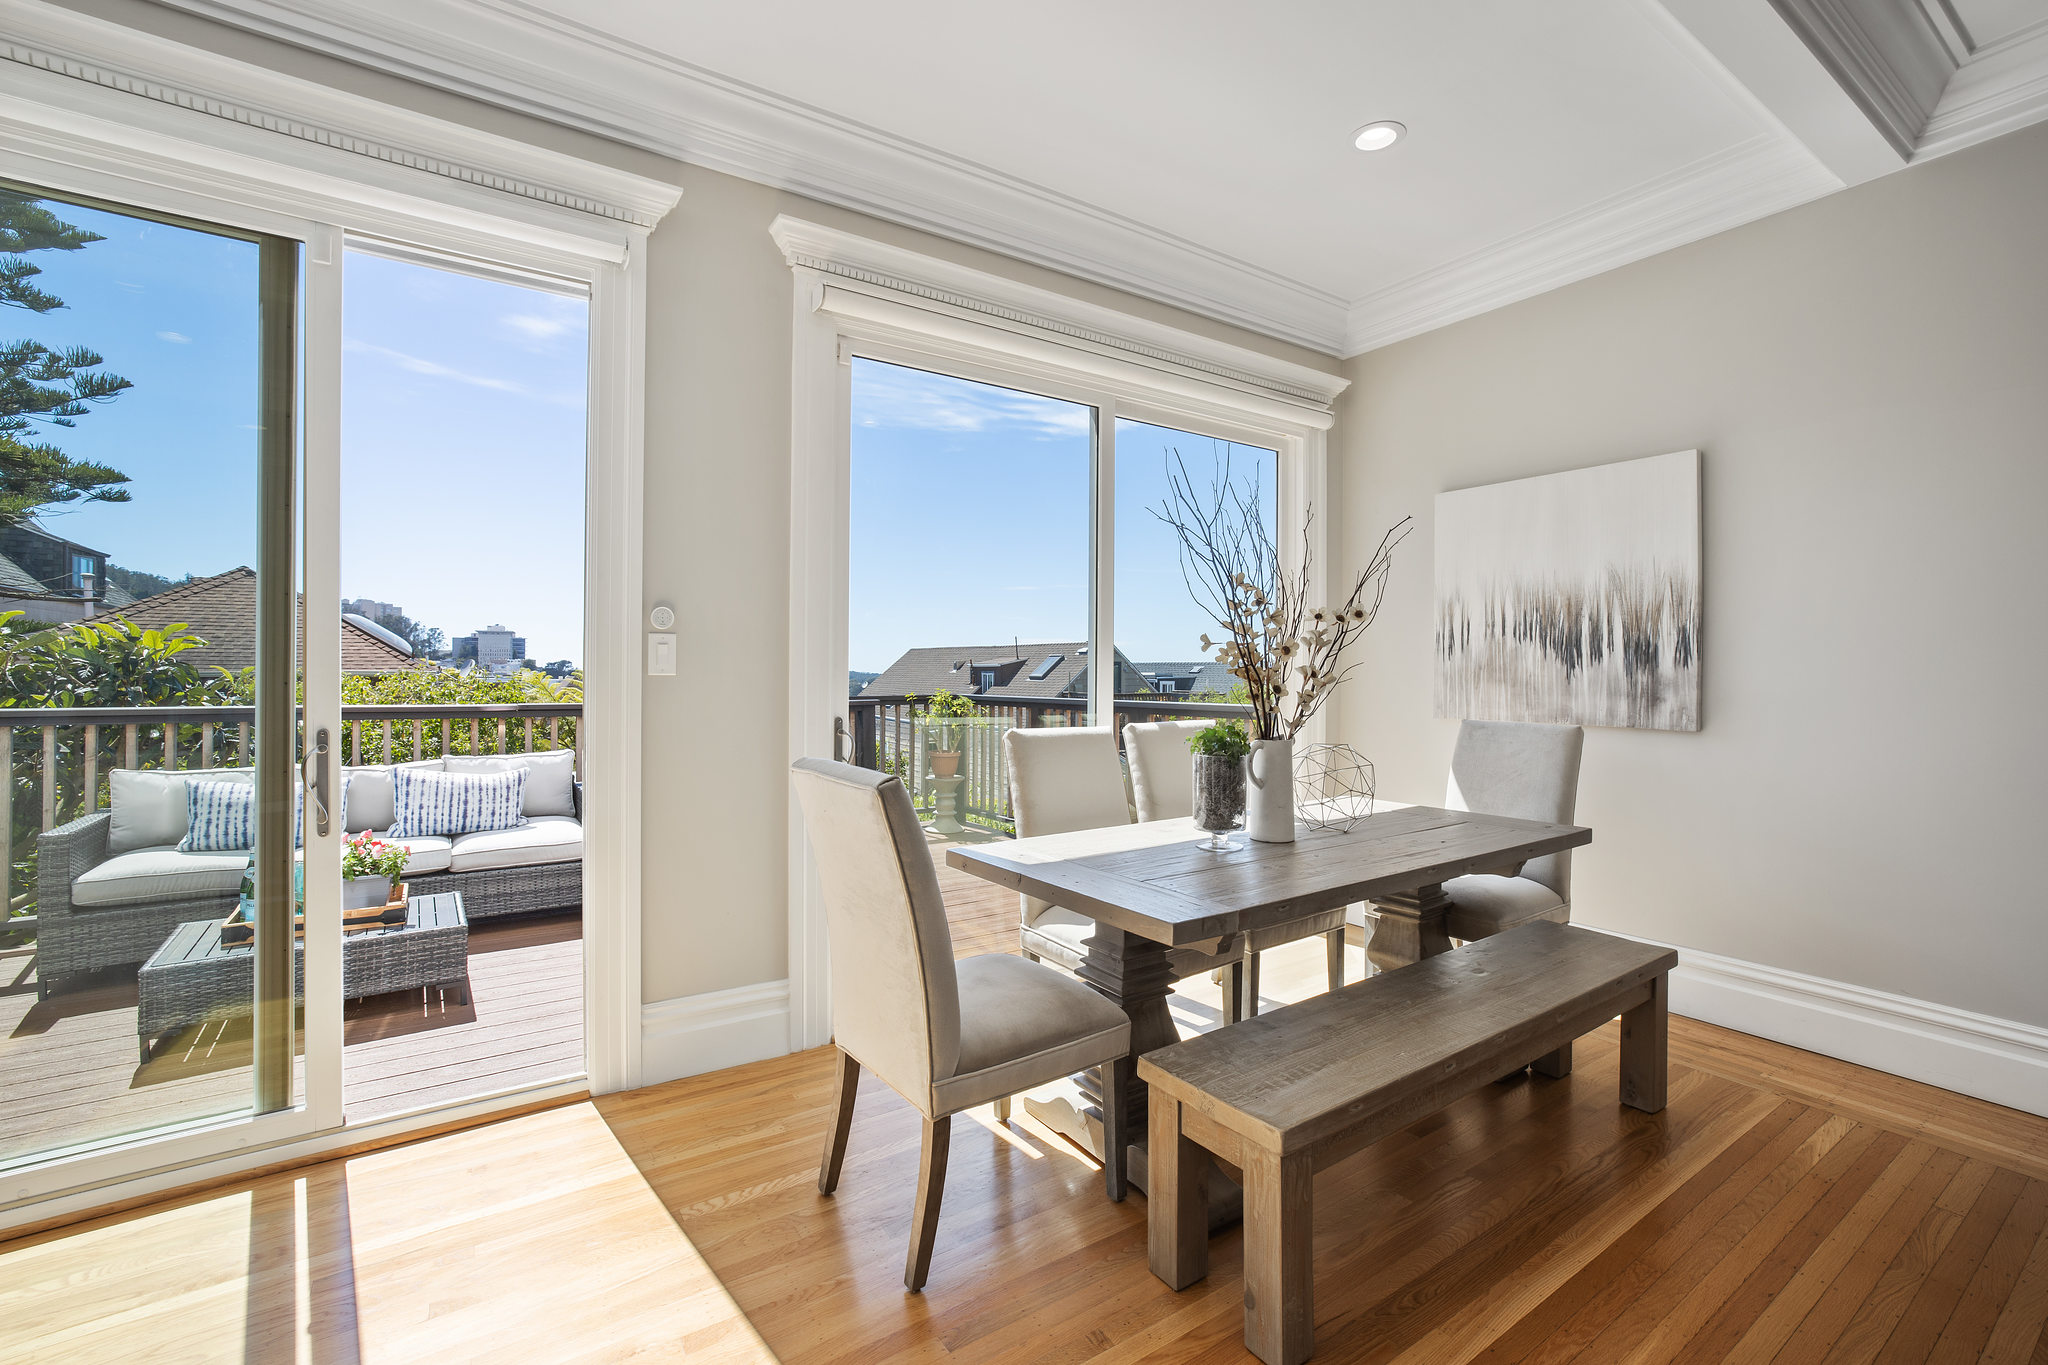 Property Photo: Eat-in kitchen space with large windows and doors, featuring a partial view of the adjoining deck